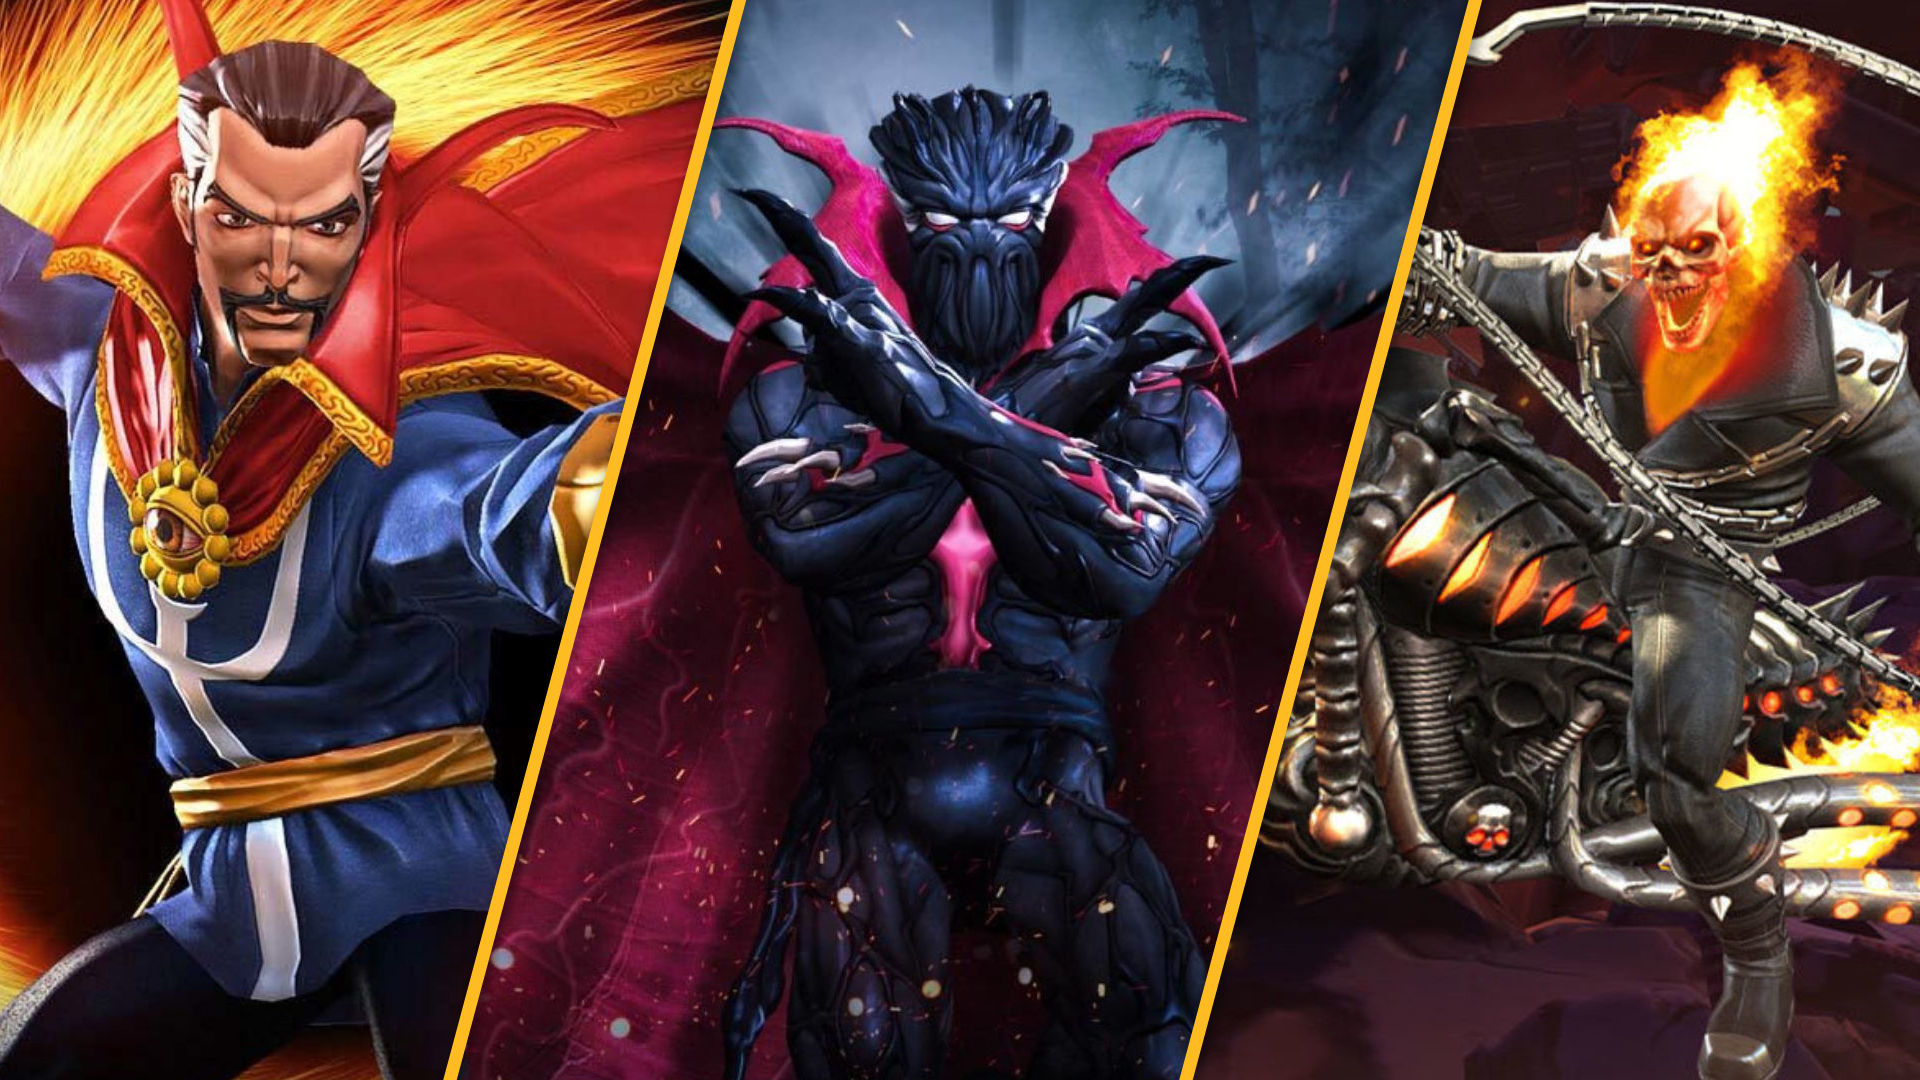 Psycho-Man MARVEL Contest of Champions Wallpapers